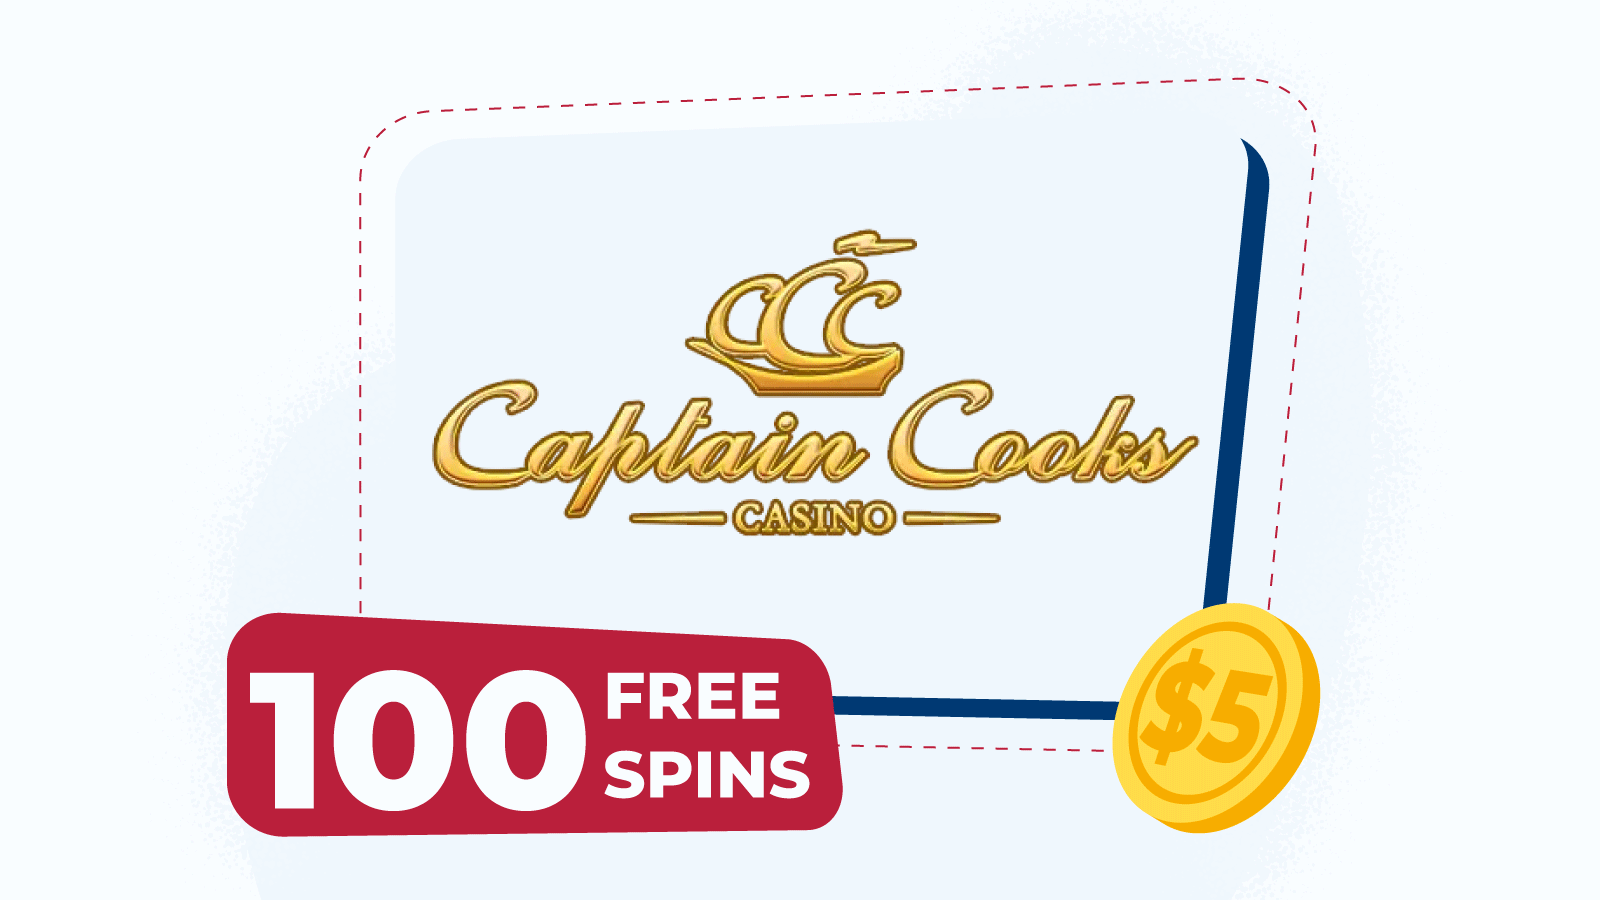 100 spins for ¥5 at Captain Cooks Casino